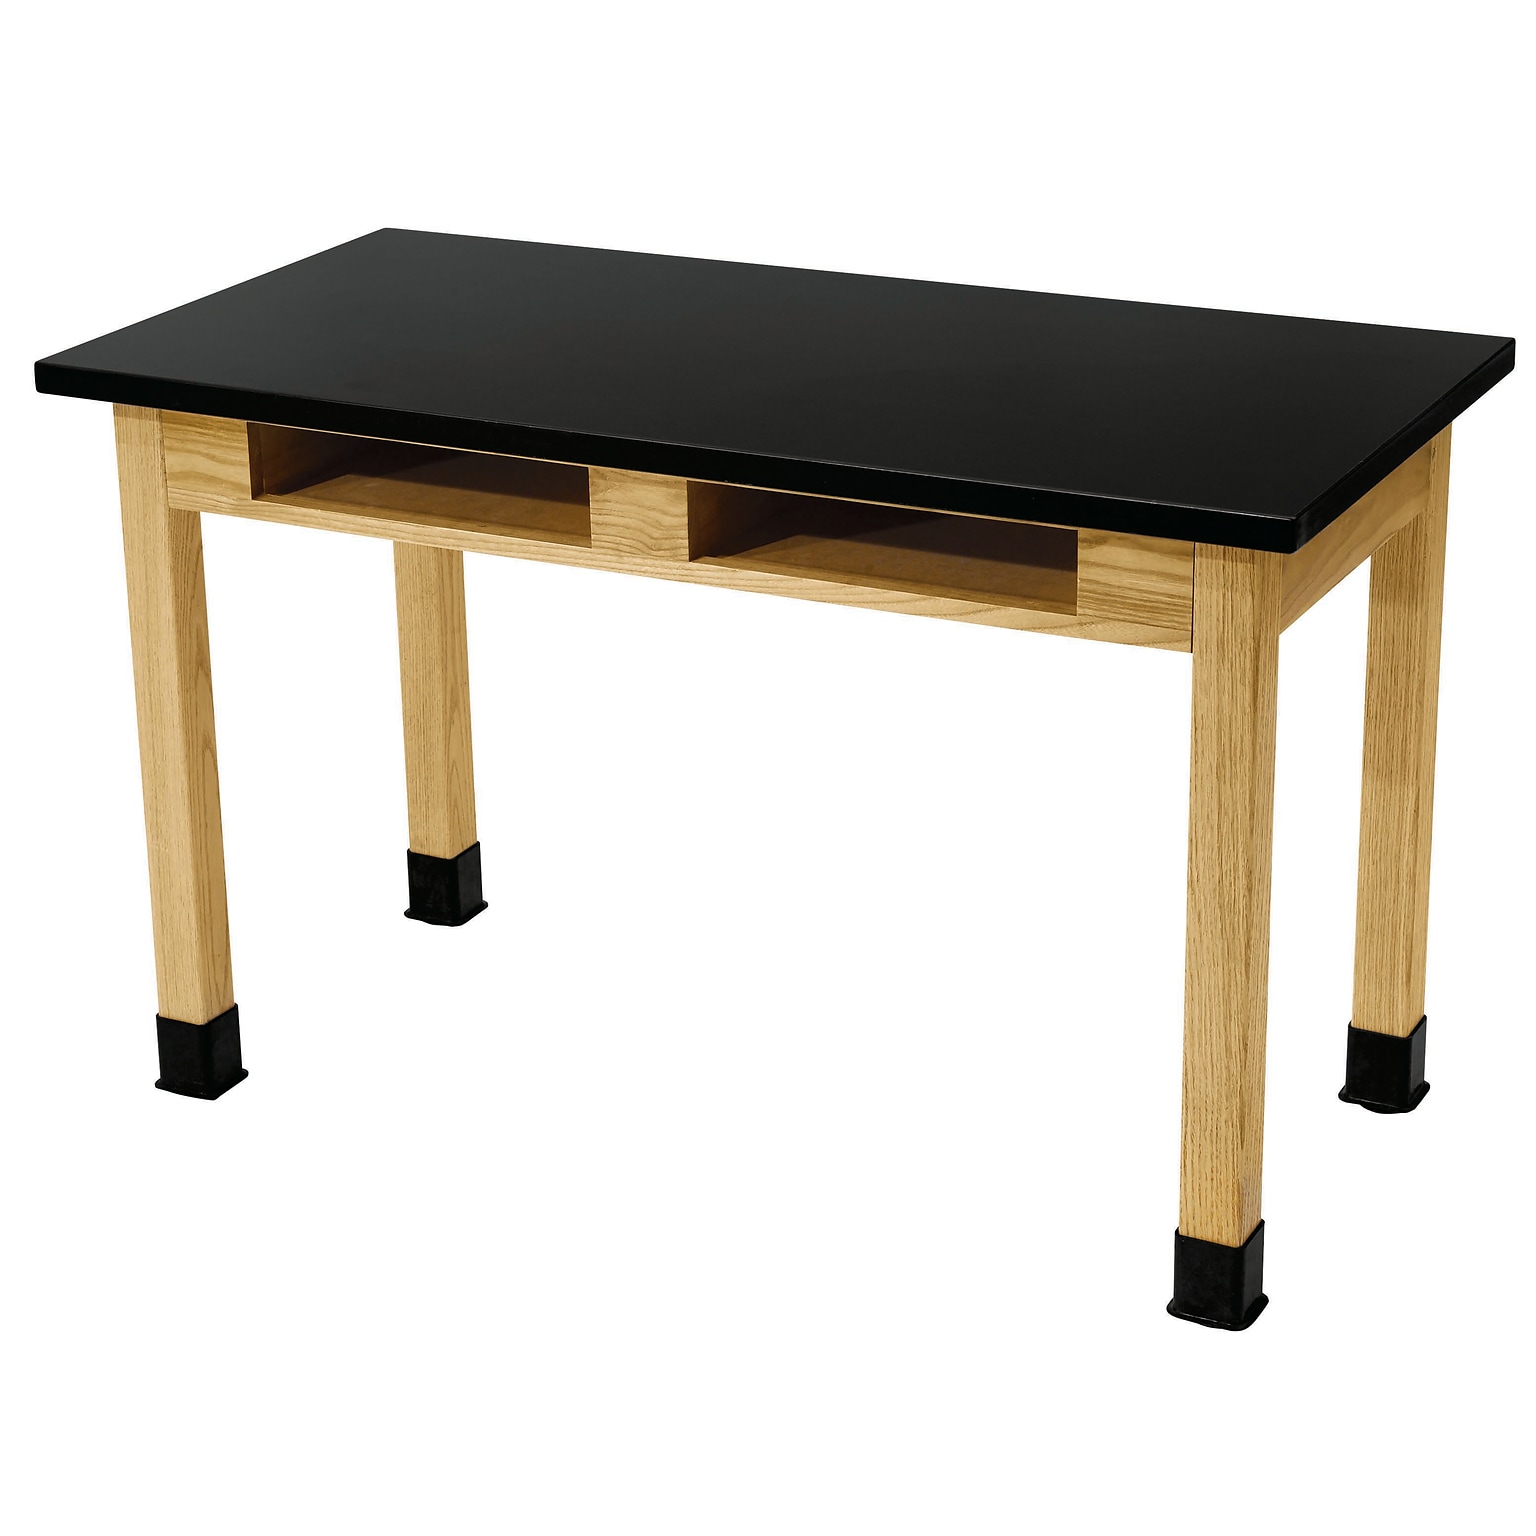 National Public Seating Chemical Resistant Series Wood Science Table, 24 x 48, Black/Ashwood (SLT1-2448CB)